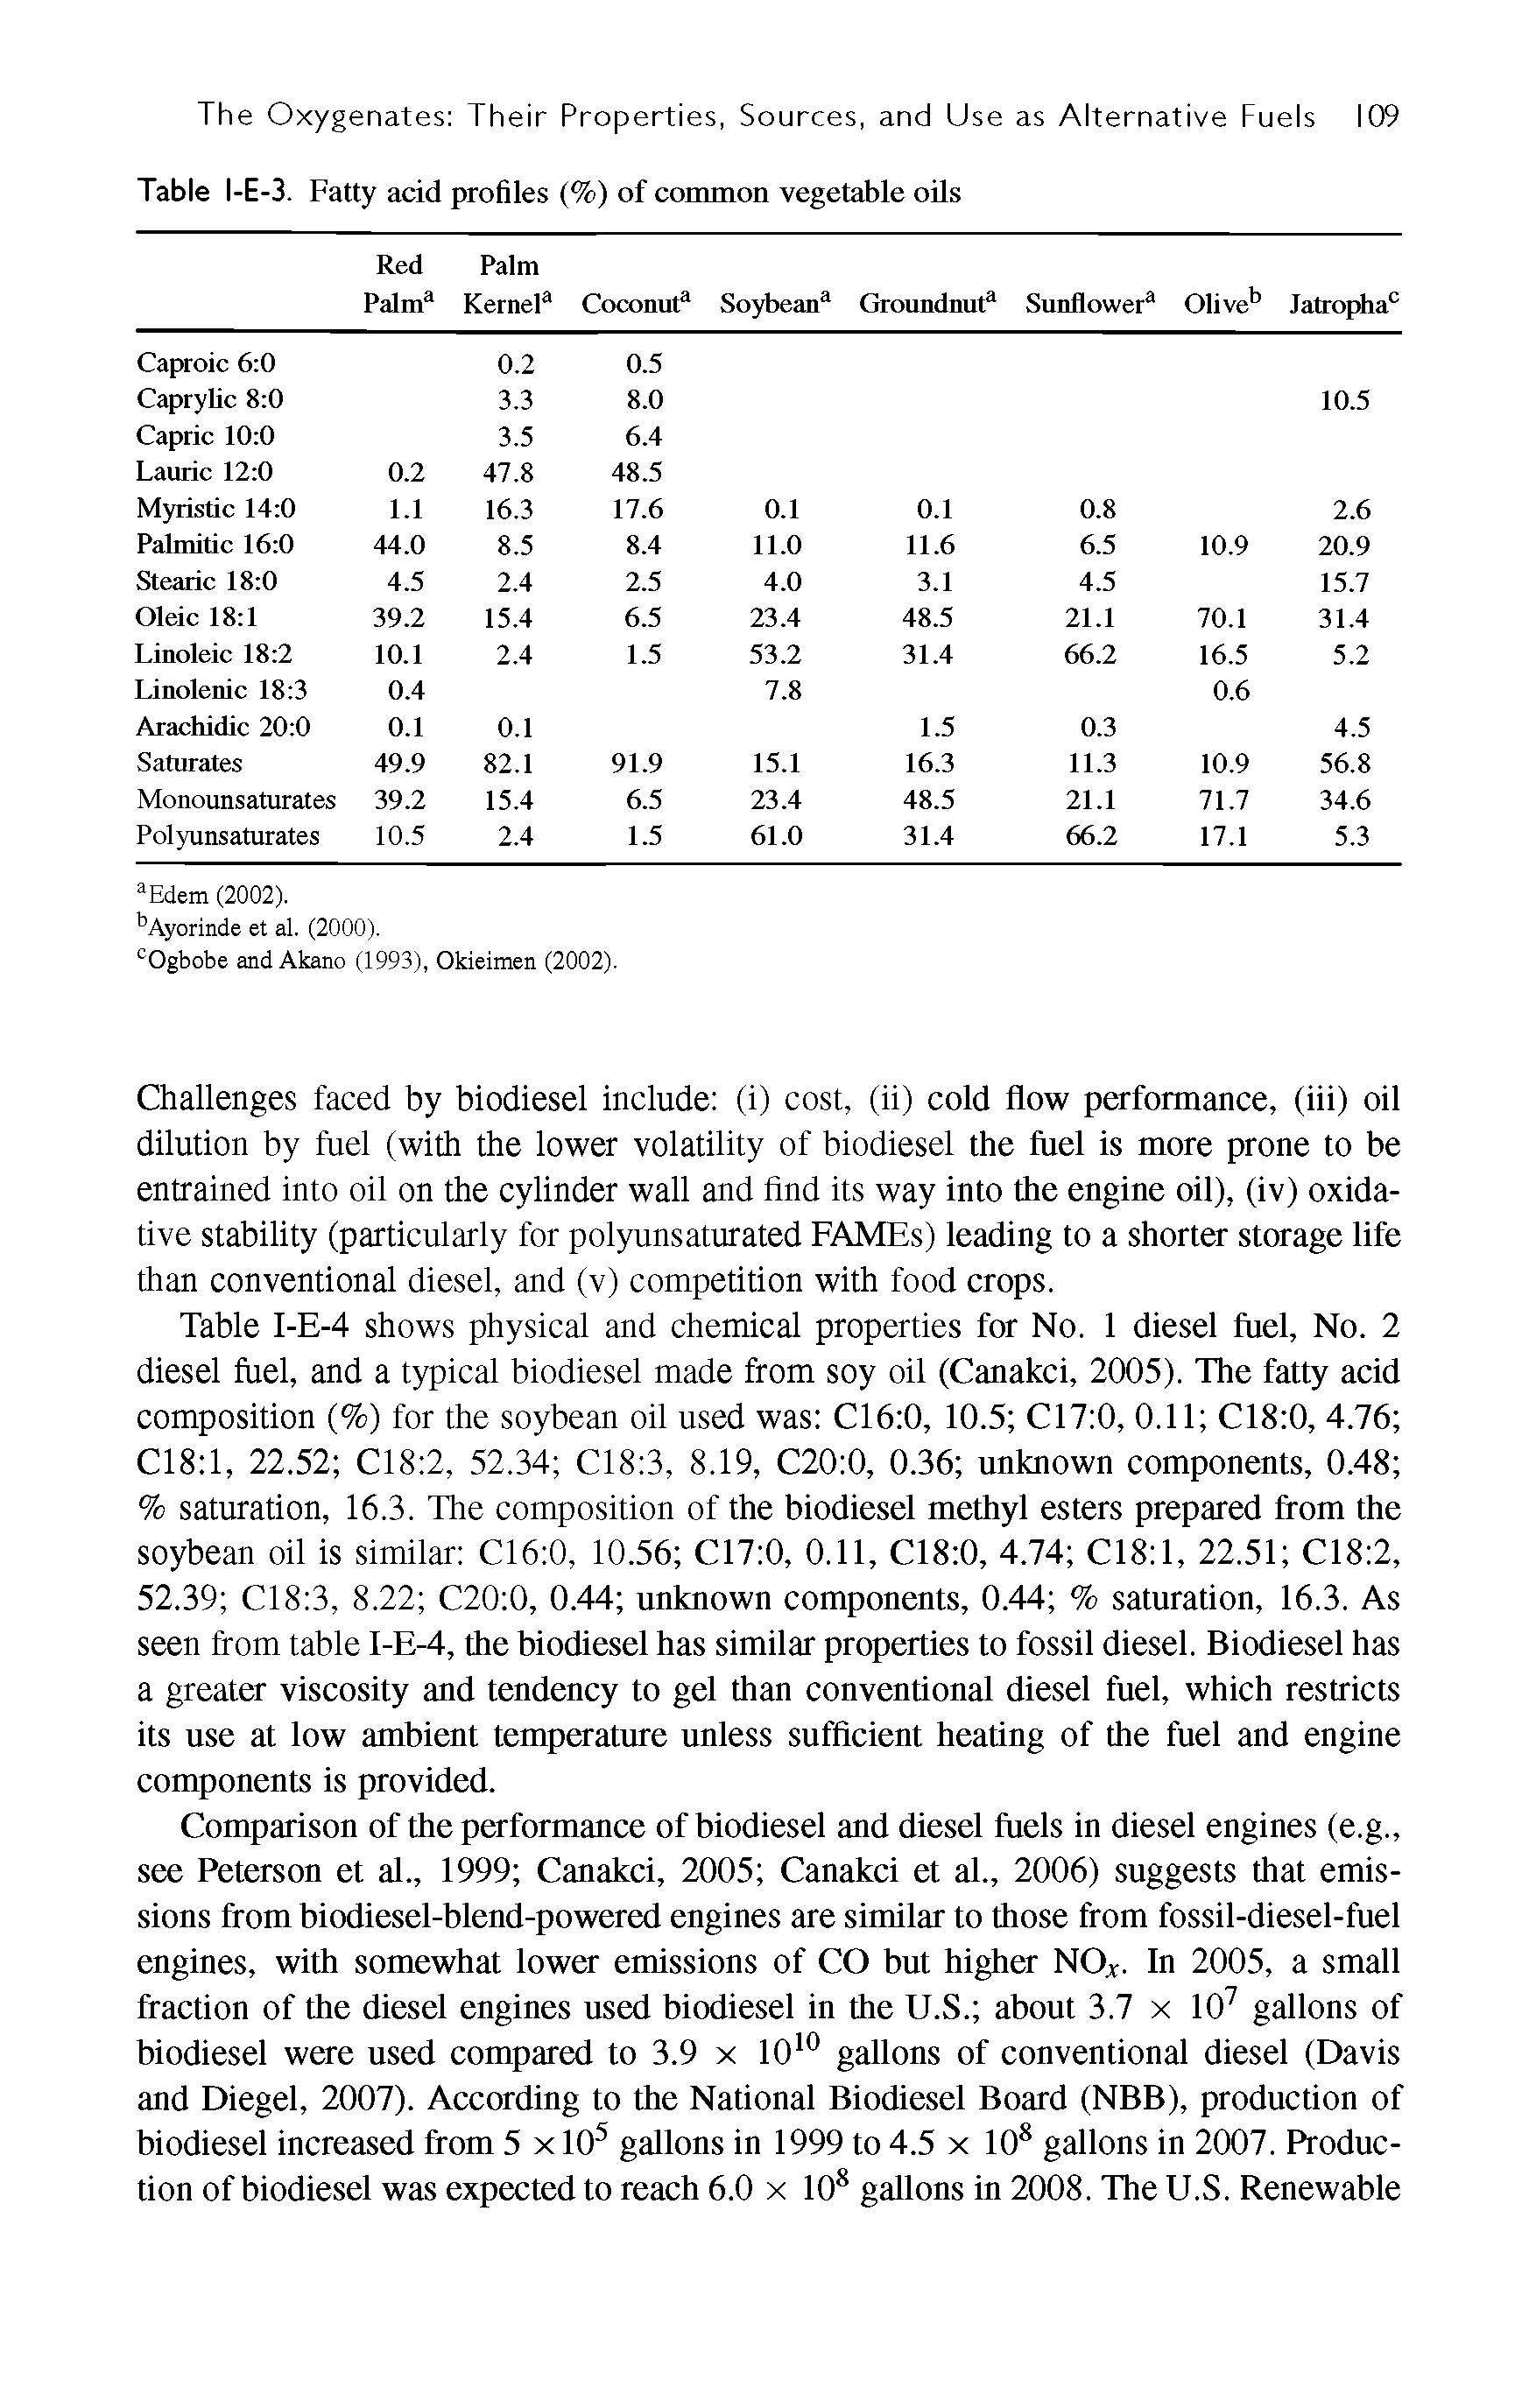 Table I-E-4 shows physical and chemical properties for No. 1 diesel fuel. No. 2 diesel fuel, and a typical biodiesel made from soy oil (Canakci, 2005). The fatty acid composition (%) for the soybean oil used was C16 0, 10.5 C17 0, 0.11 C18 0, 4.76 C18 l, 22.52 C18 2, 52.34 C18 3, 8.19, C20 0, 0.36 unknown components, 0.48 % saturation, 16.3. The composition of the biodiesel methyl esters prepared from the soybean oil is similar C16 0, 10.56 C17 0, 0.11, C18 0, 4.74 C18 l, 22.51 C18 2, 52.39 C18 3, 8.22 C20 0, 0.44 unknown components, 0.44 % saturation, 16.3. As seen from table I-E-4, the biodiesel has similar properties to fossil diesel. Biodiesel has a greater viscosity and tendency to gel than conventional diesel fuel, which restricts its use at low ambient temperature unless sufficient heating of the fuel and engine components is provided.